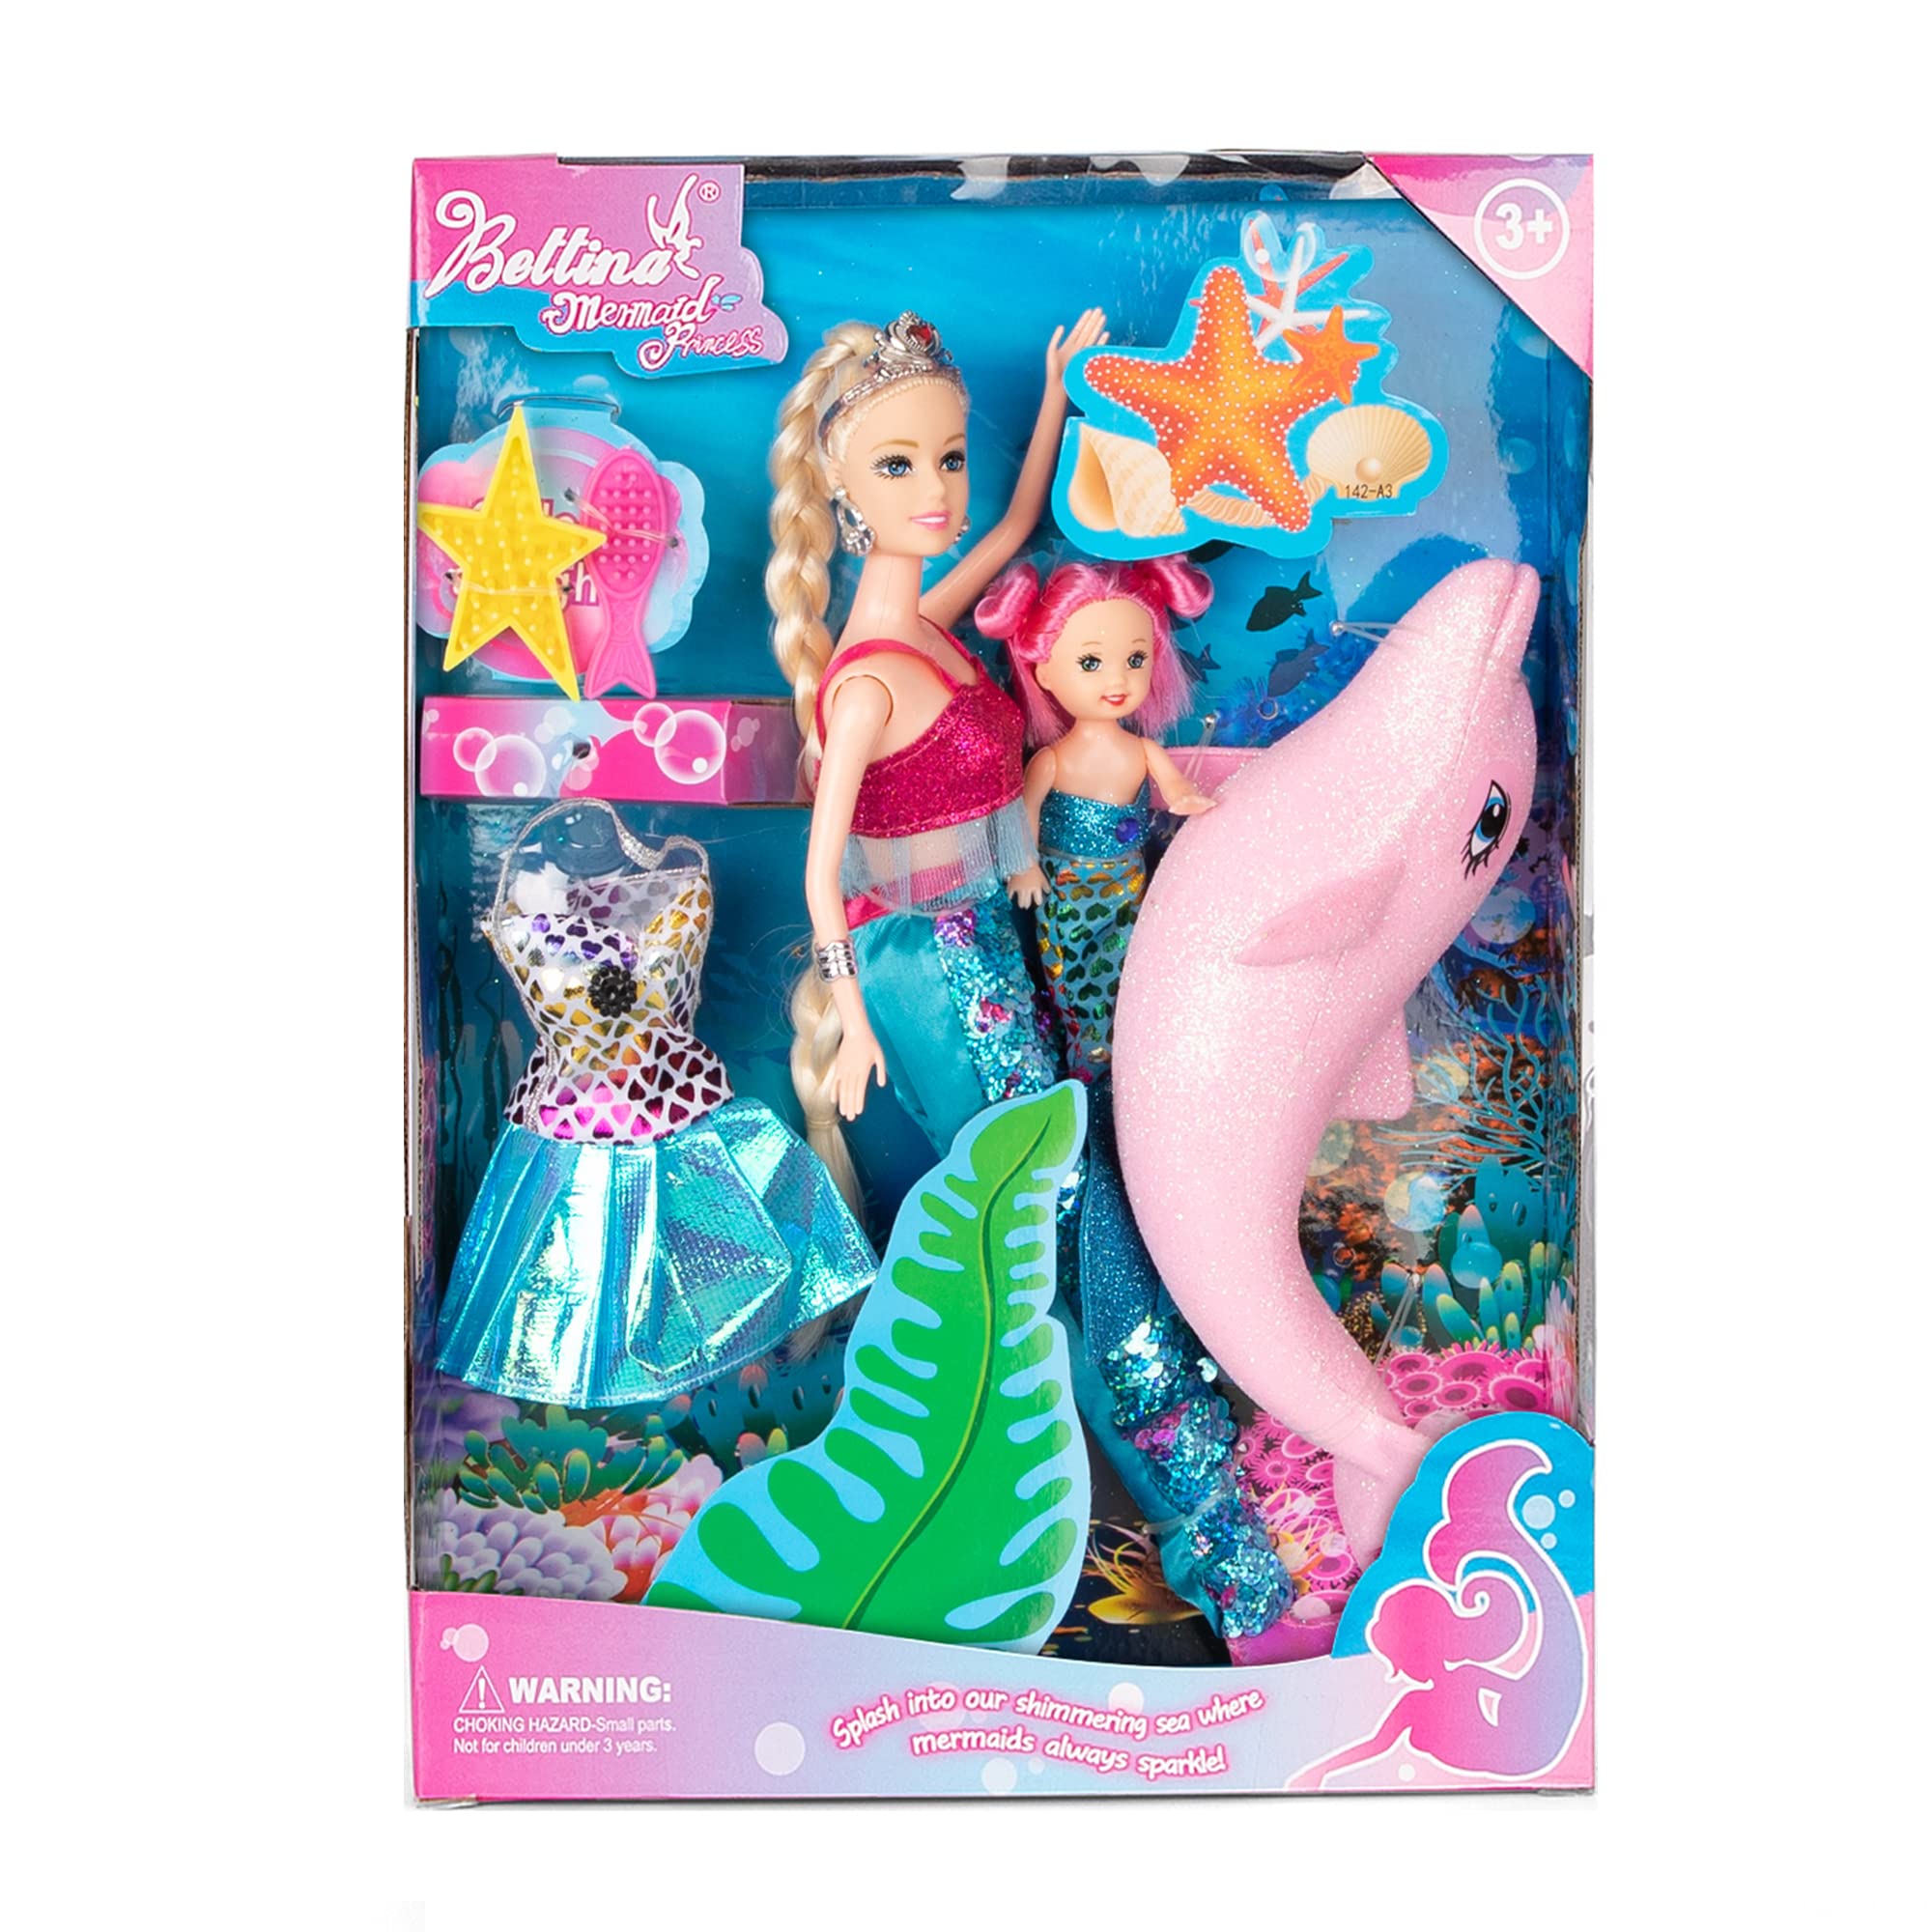 2023 Mermaid Princess Doll Playset, Color Changing Mermaid Tail by Reversing Squins, 12